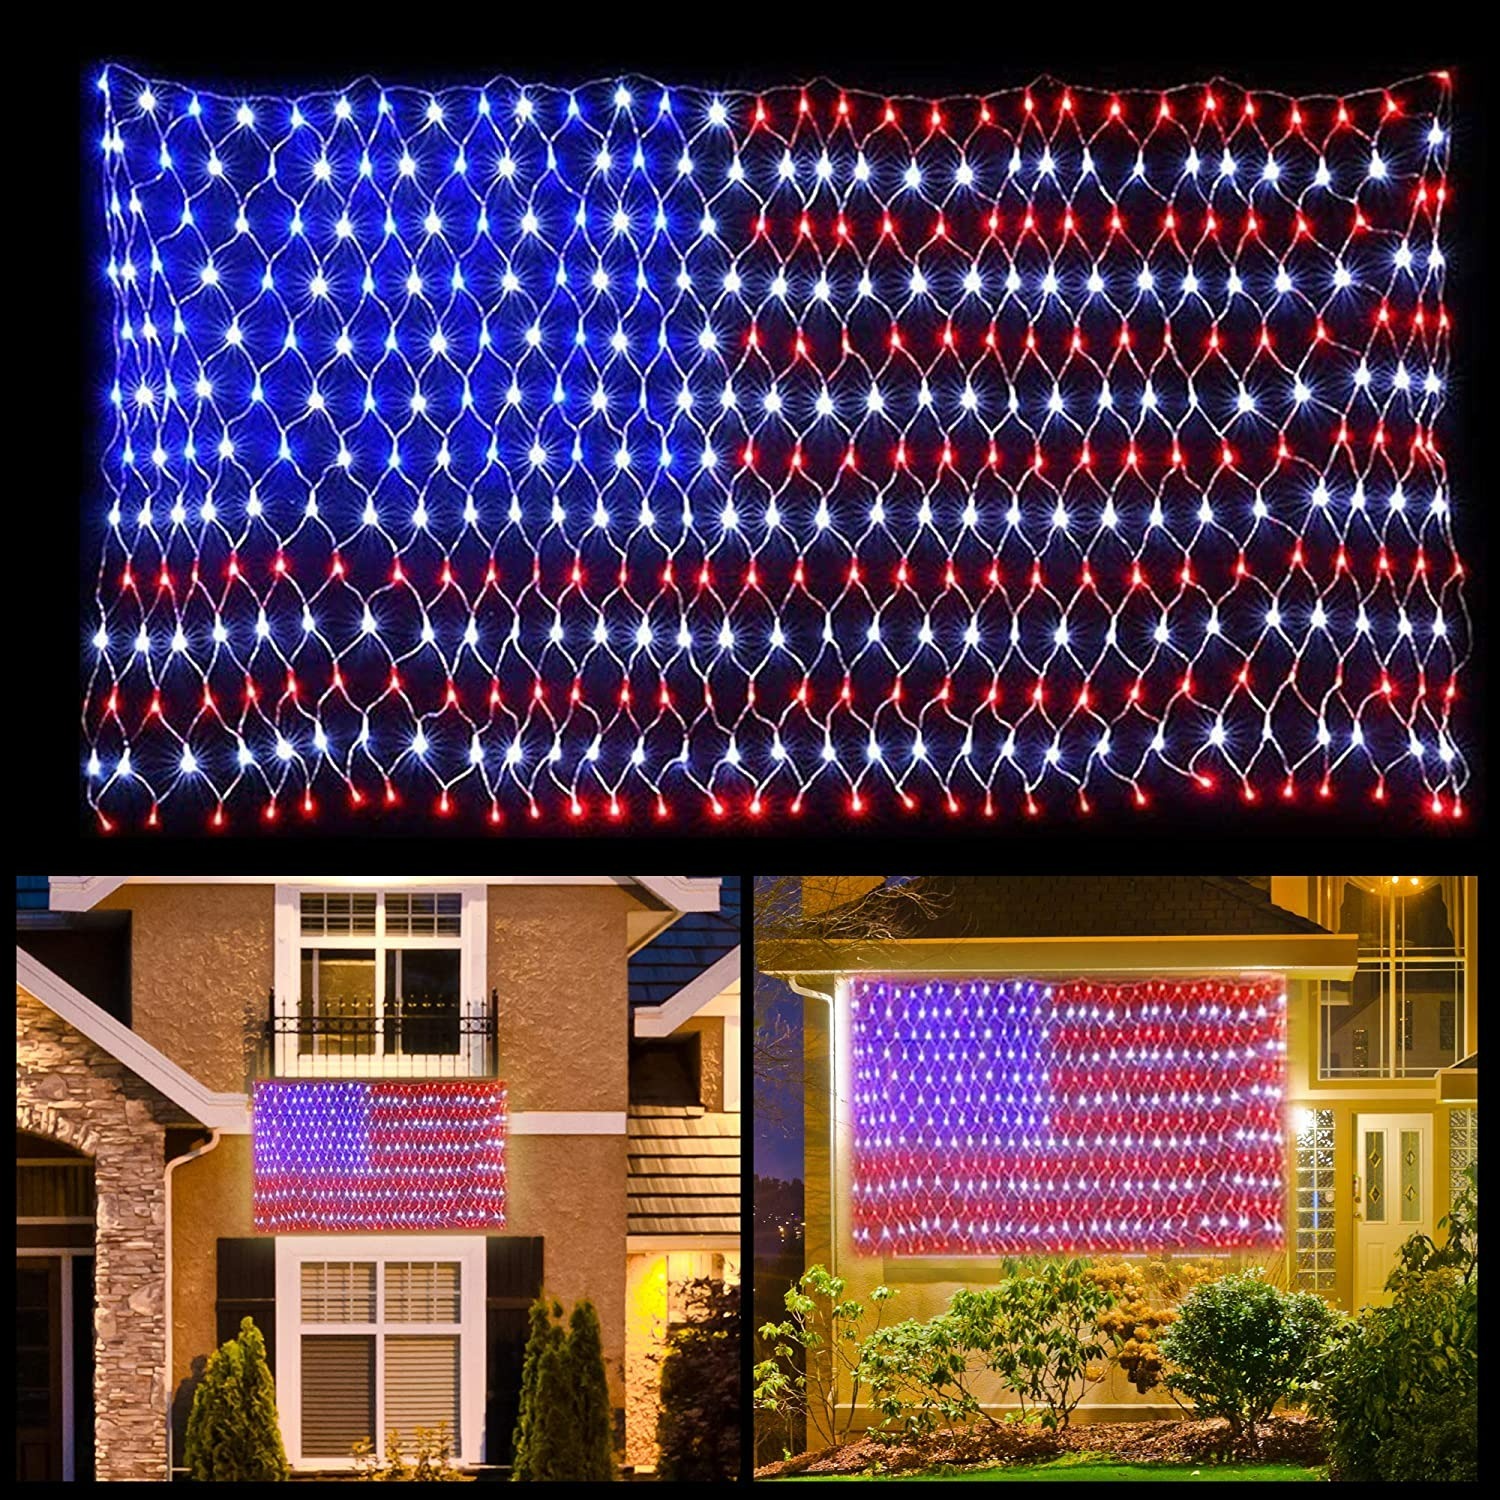 6.5' American Flag Net Lights with 420 LEDs Outdoor Indoor $12.49 + Free Shipping